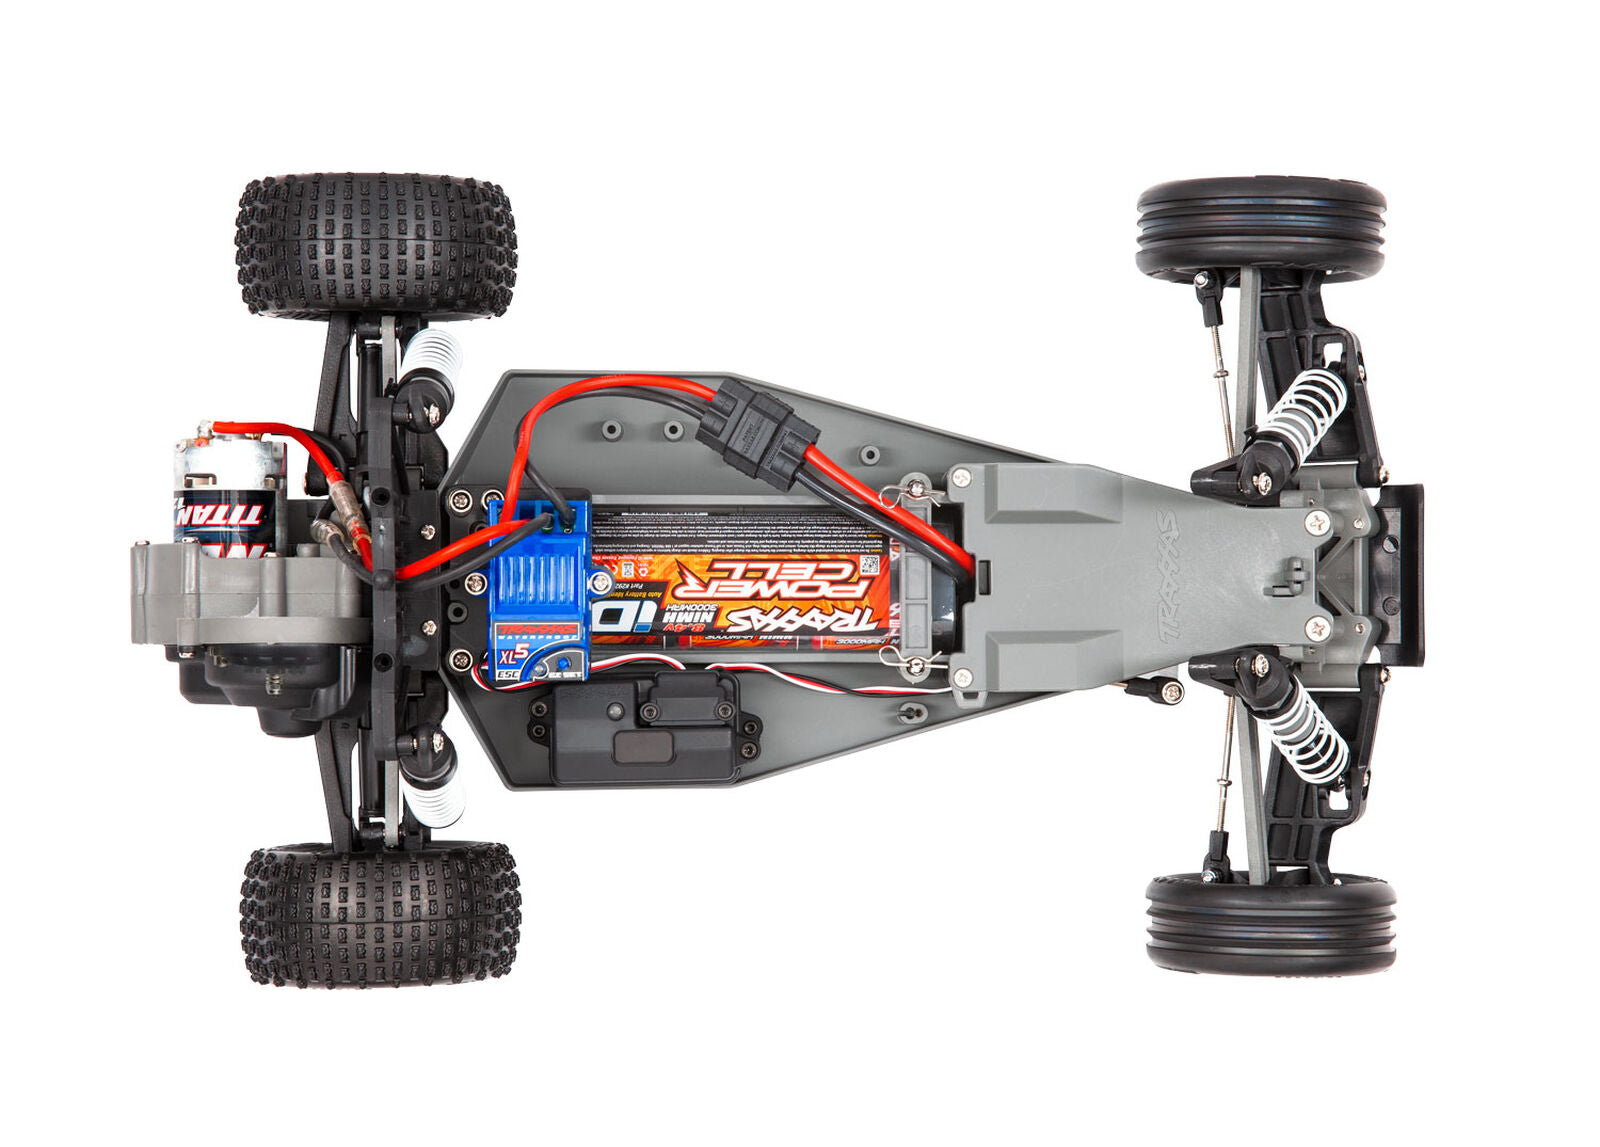 Bandit 1/10 Extreme Sports Buggy w/USB-C Red